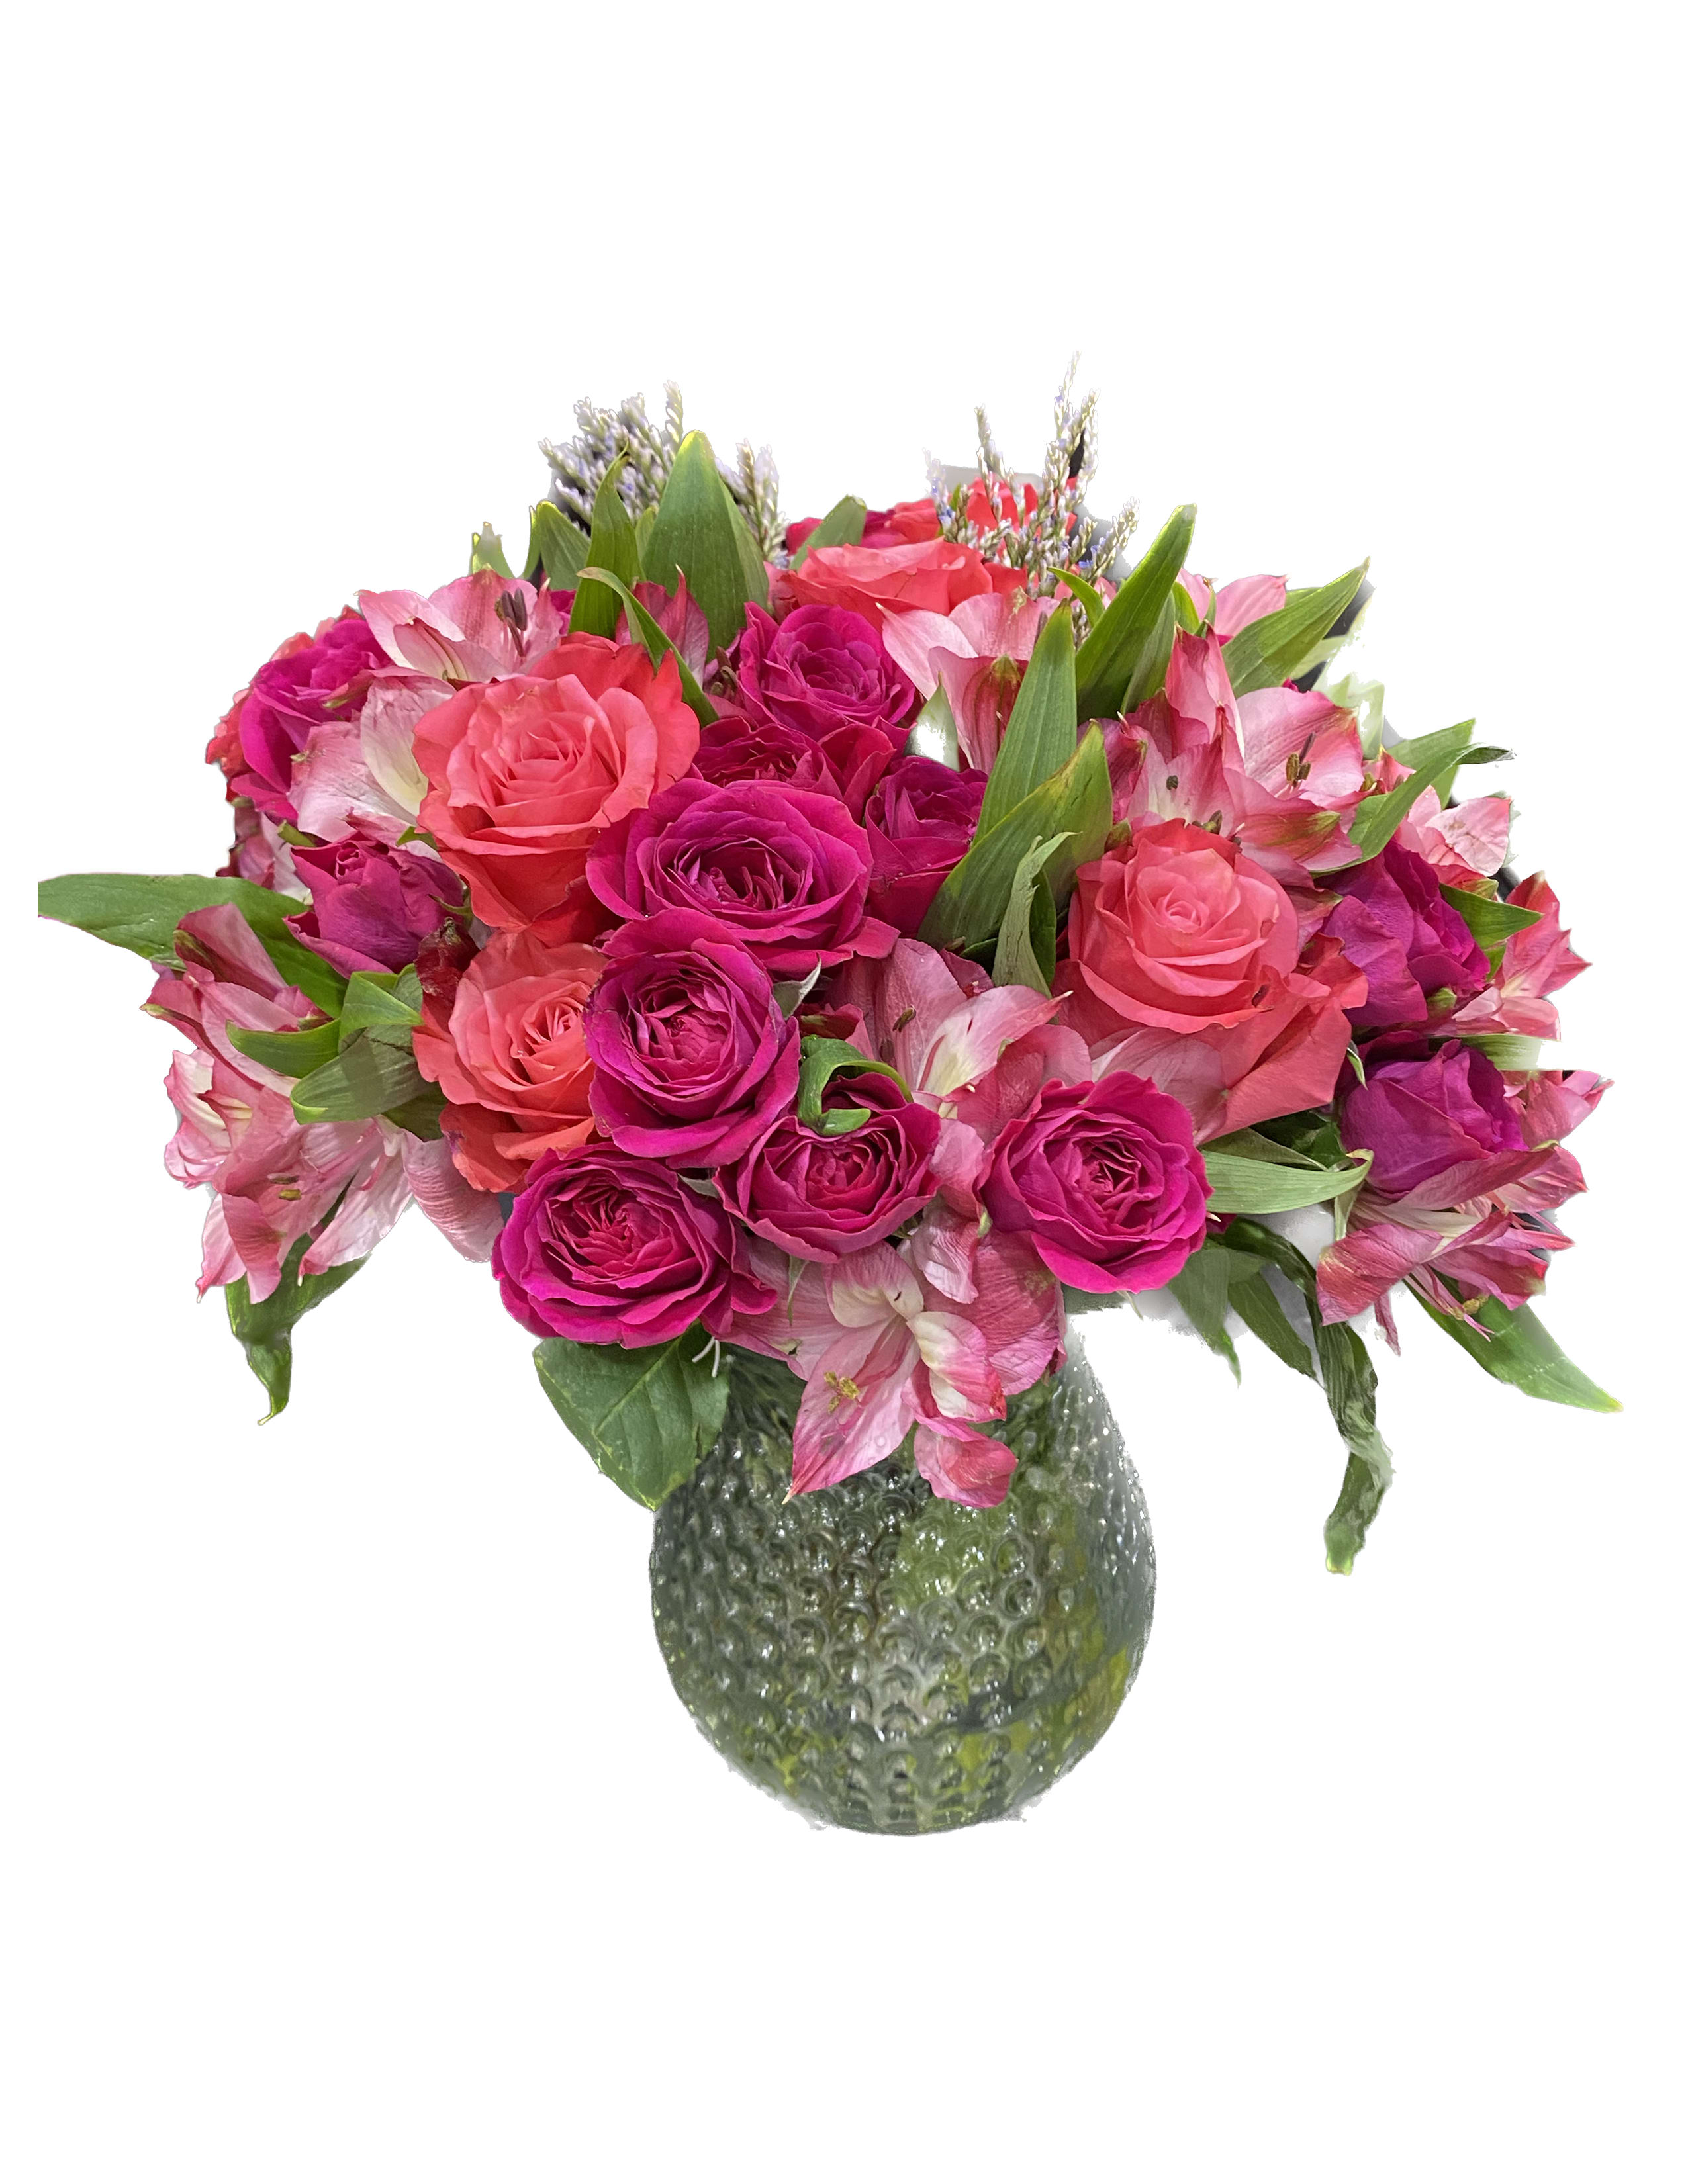 Rose And Alstromeria Mixed ARR - Rose and Alstromeria Mixed ARR Colors may vary depending on season and availability.